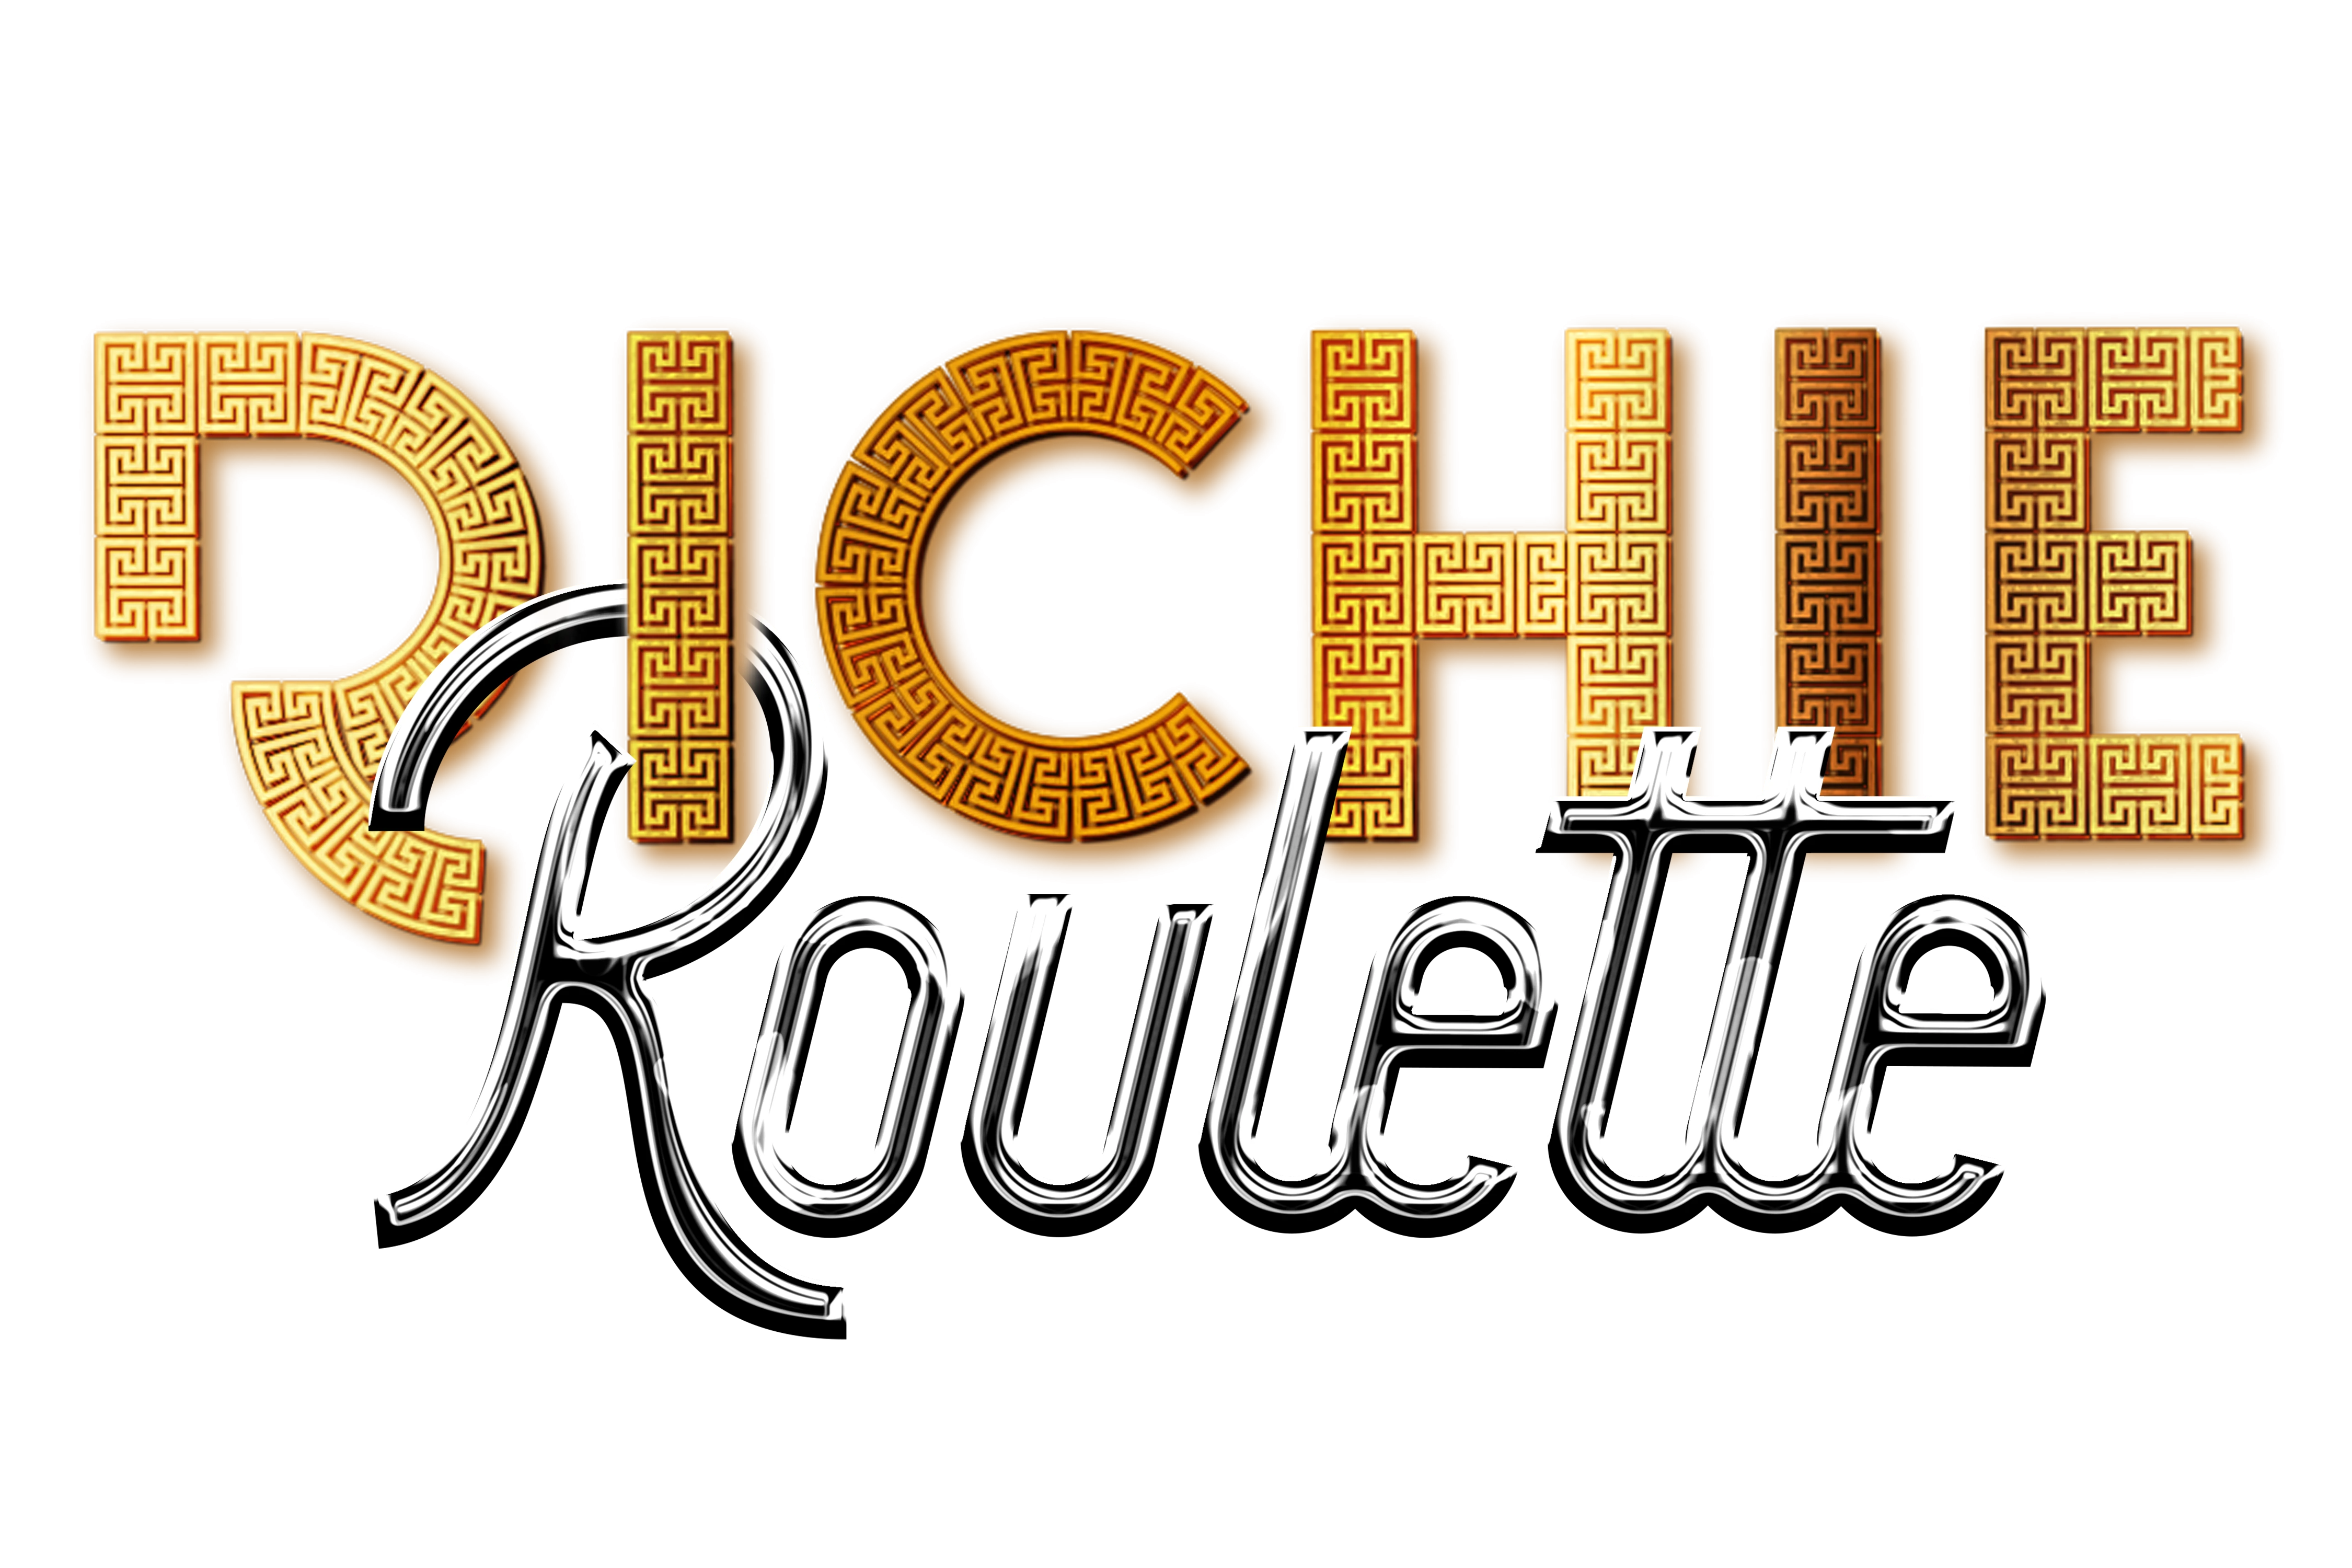 6528-richie-roulette-redesign-1-16911491862383.png